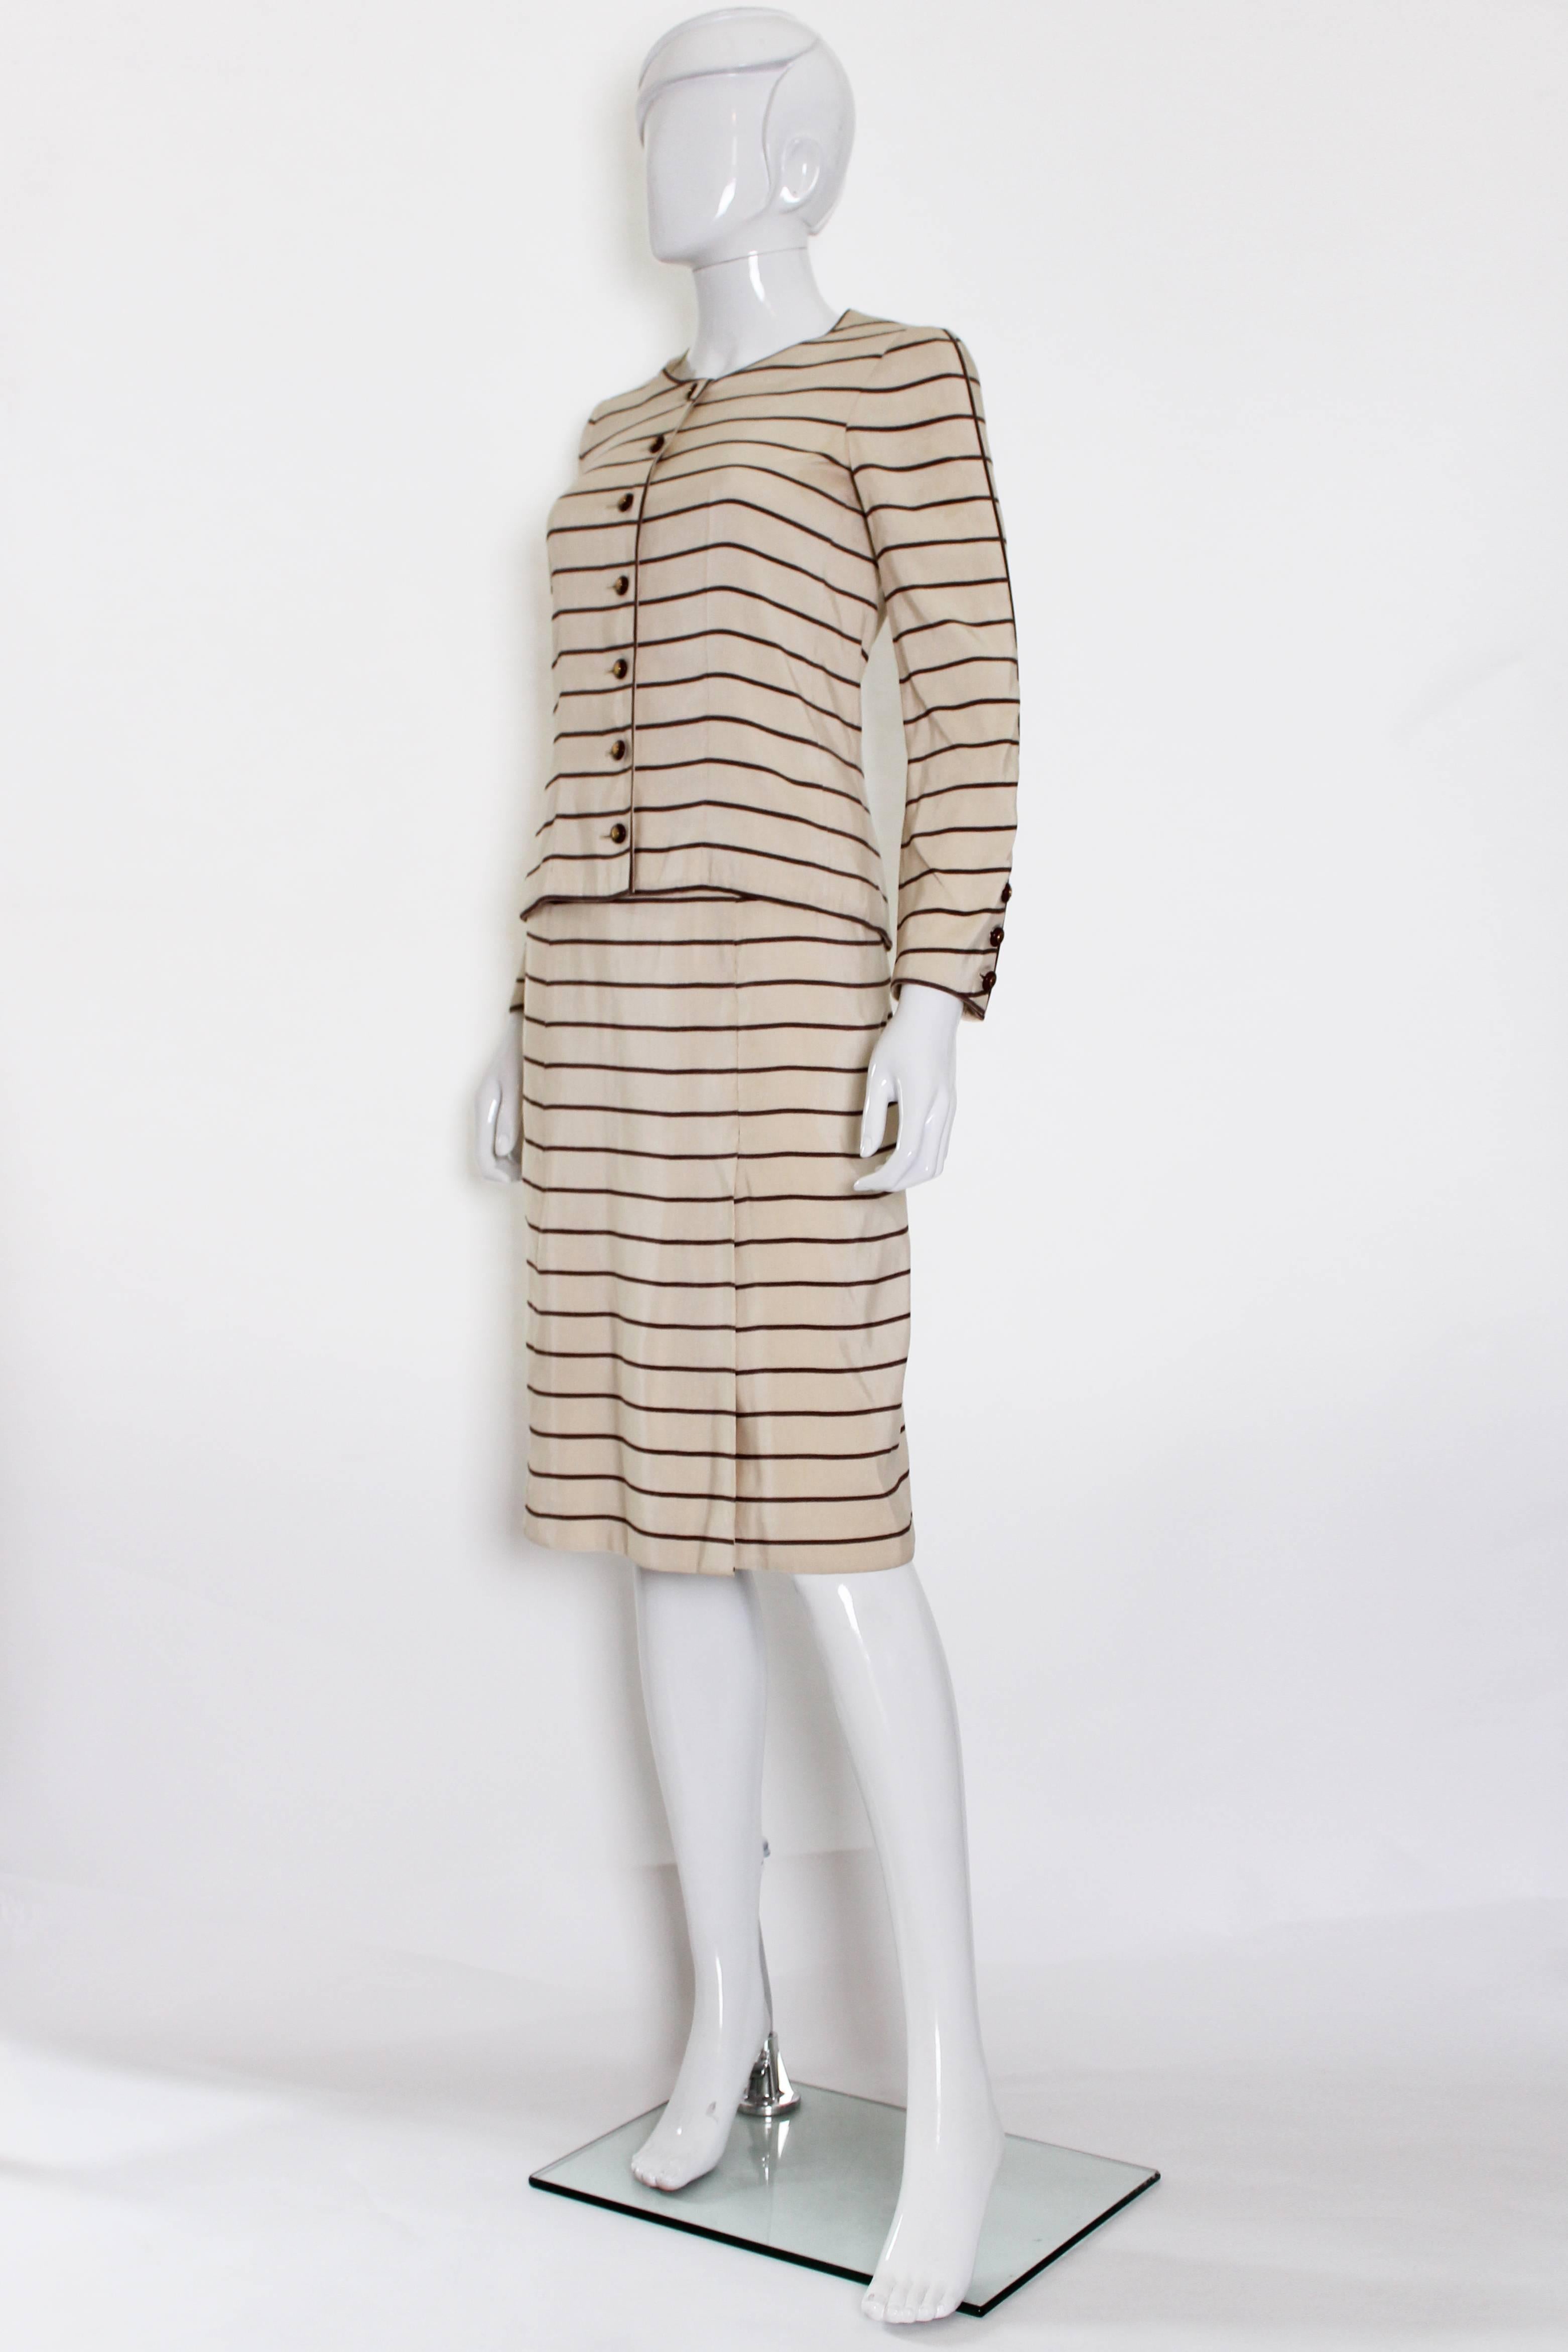 A charming and chic vintage (1974)  haute couture skirt suit by Chanel.
The suit is made of a cotton/silk mix, taupe stripes on an ivory background.
The suit is lined in silk , the buttons are made of wood, and the jacket has a chain in the hem. The